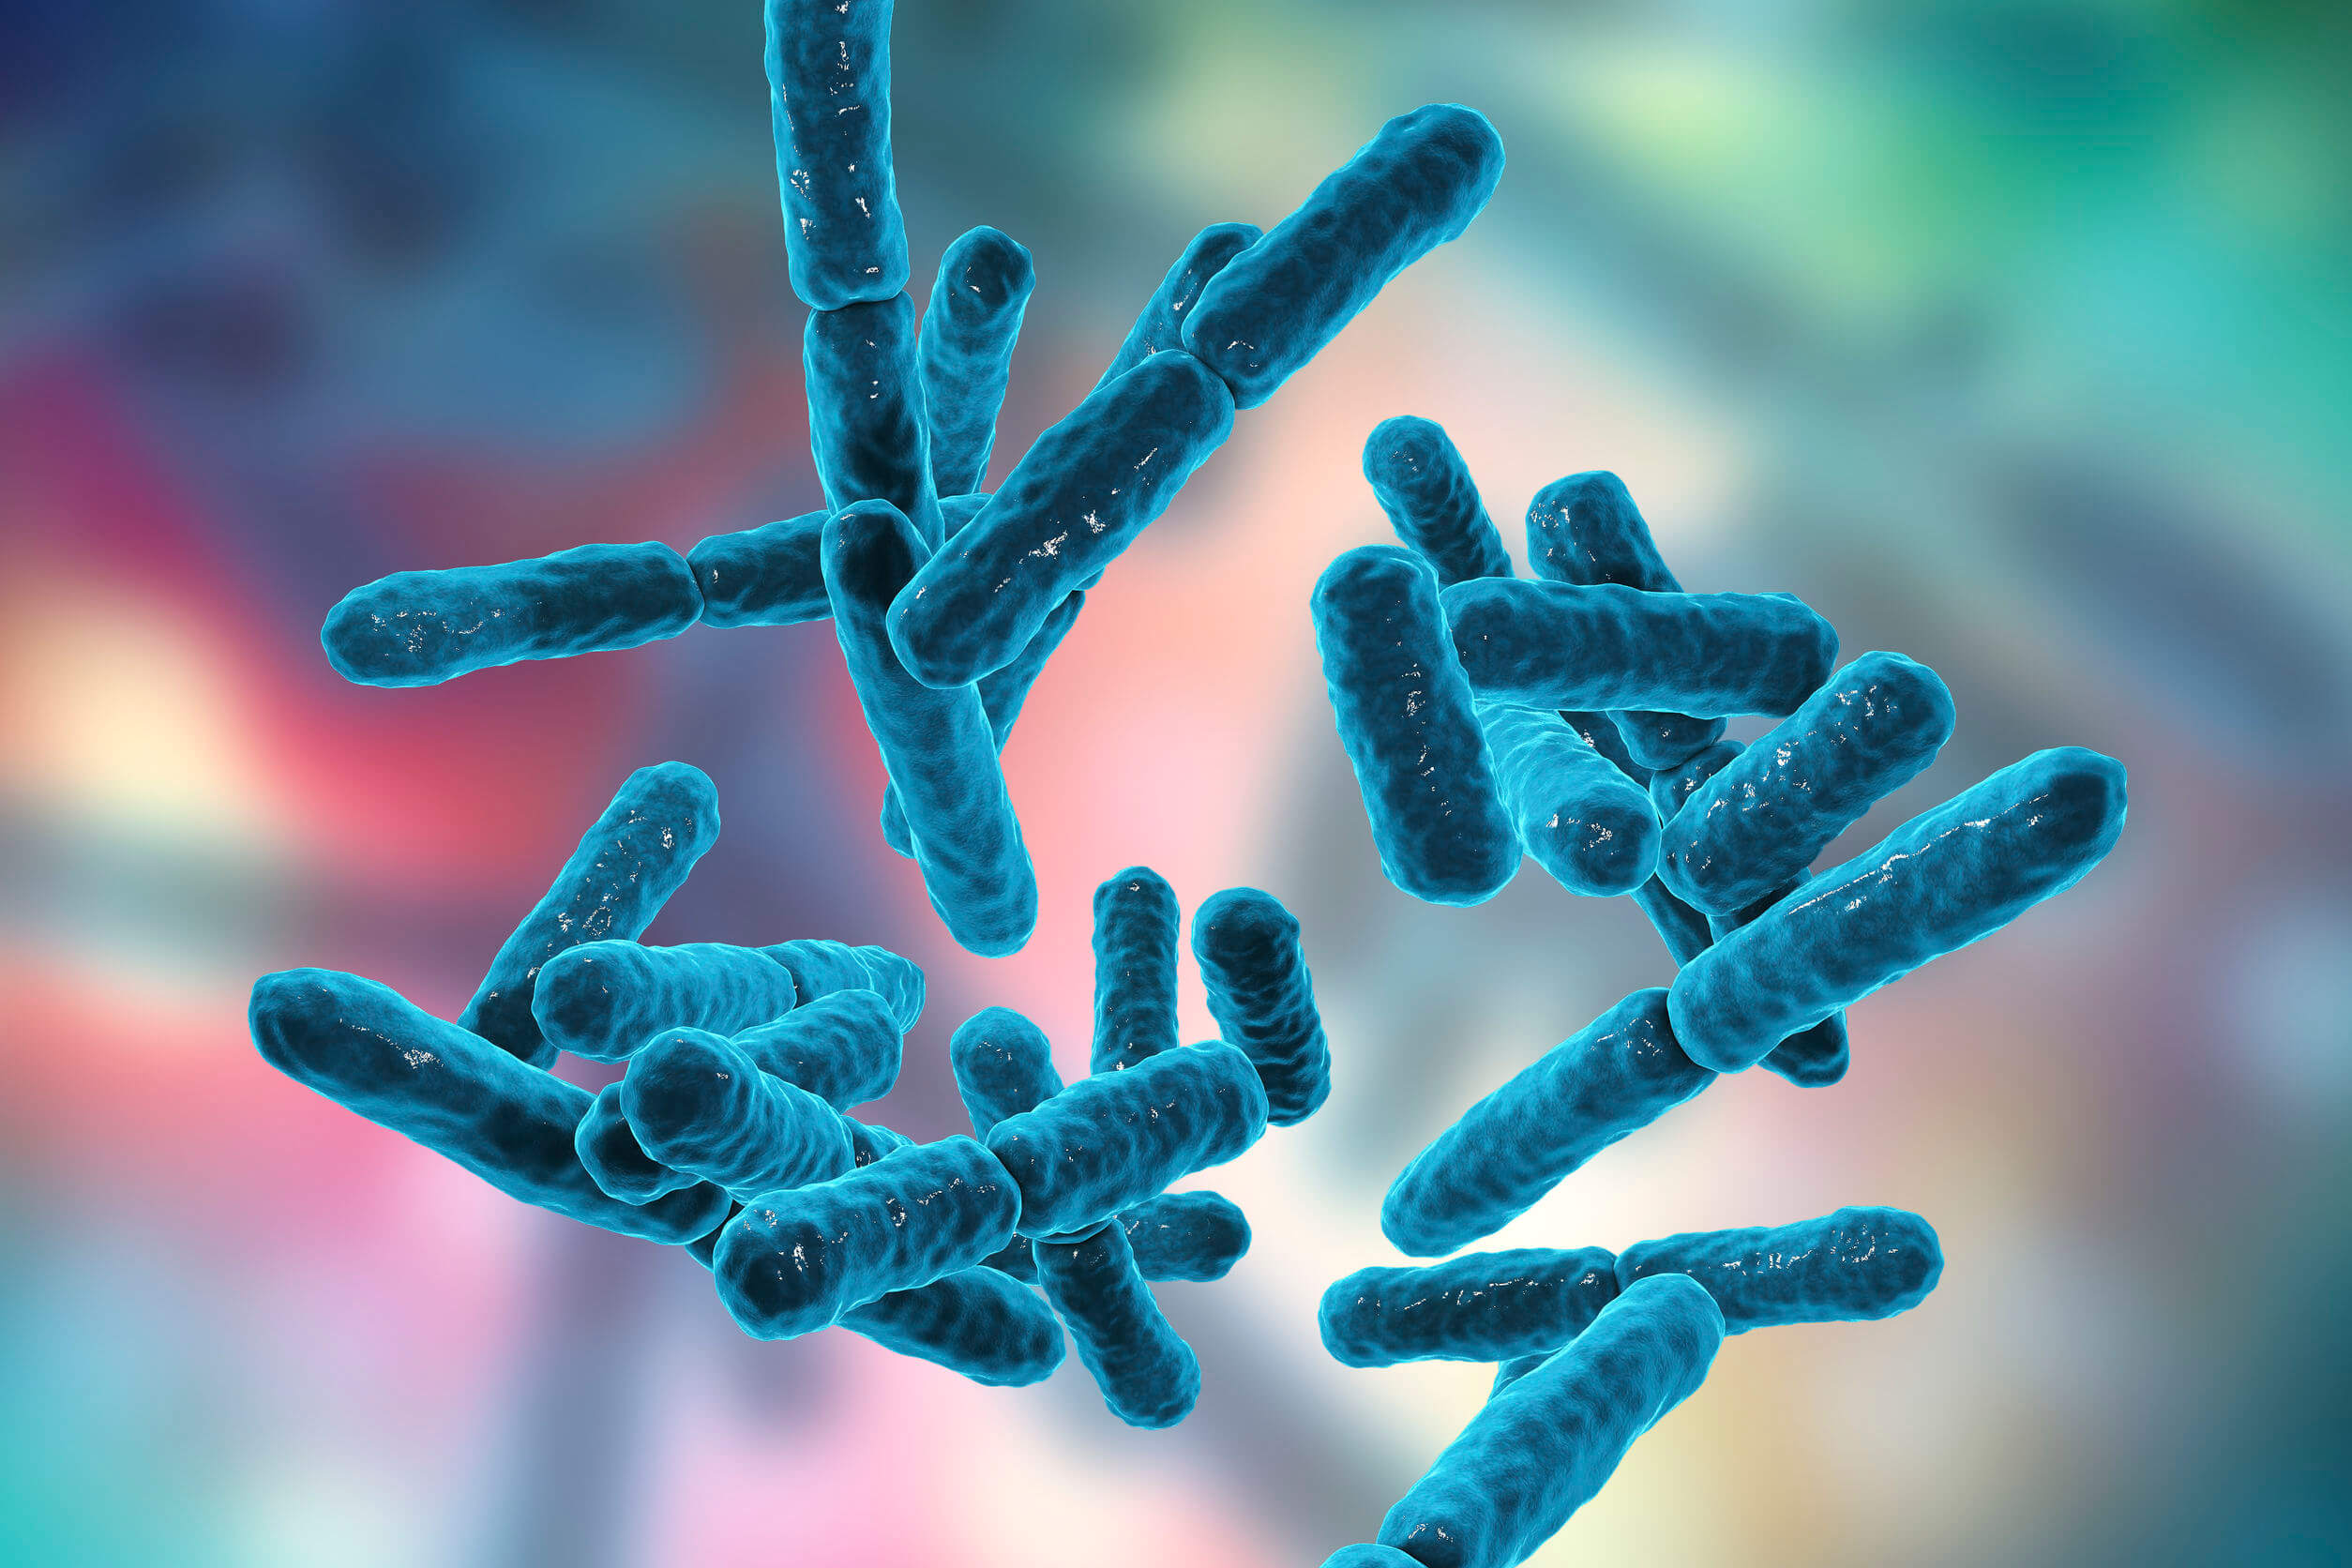 Microbiota protects against infections.